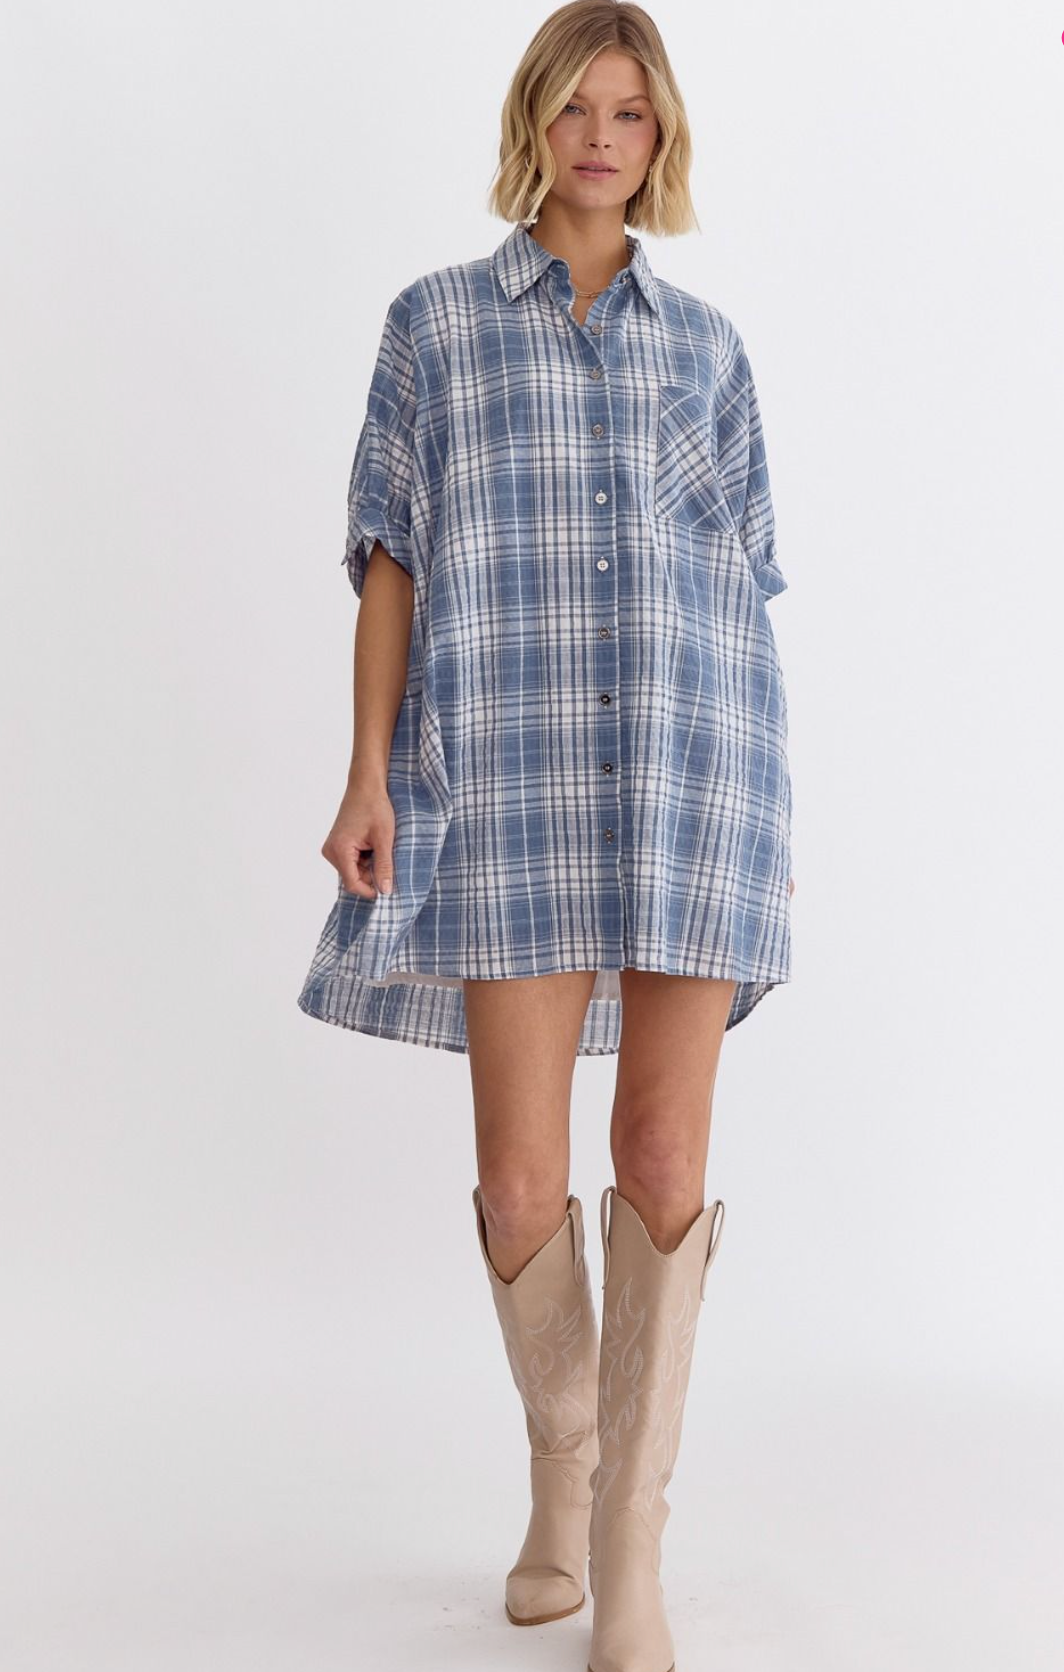 Get Together Plaid Chambray Dress